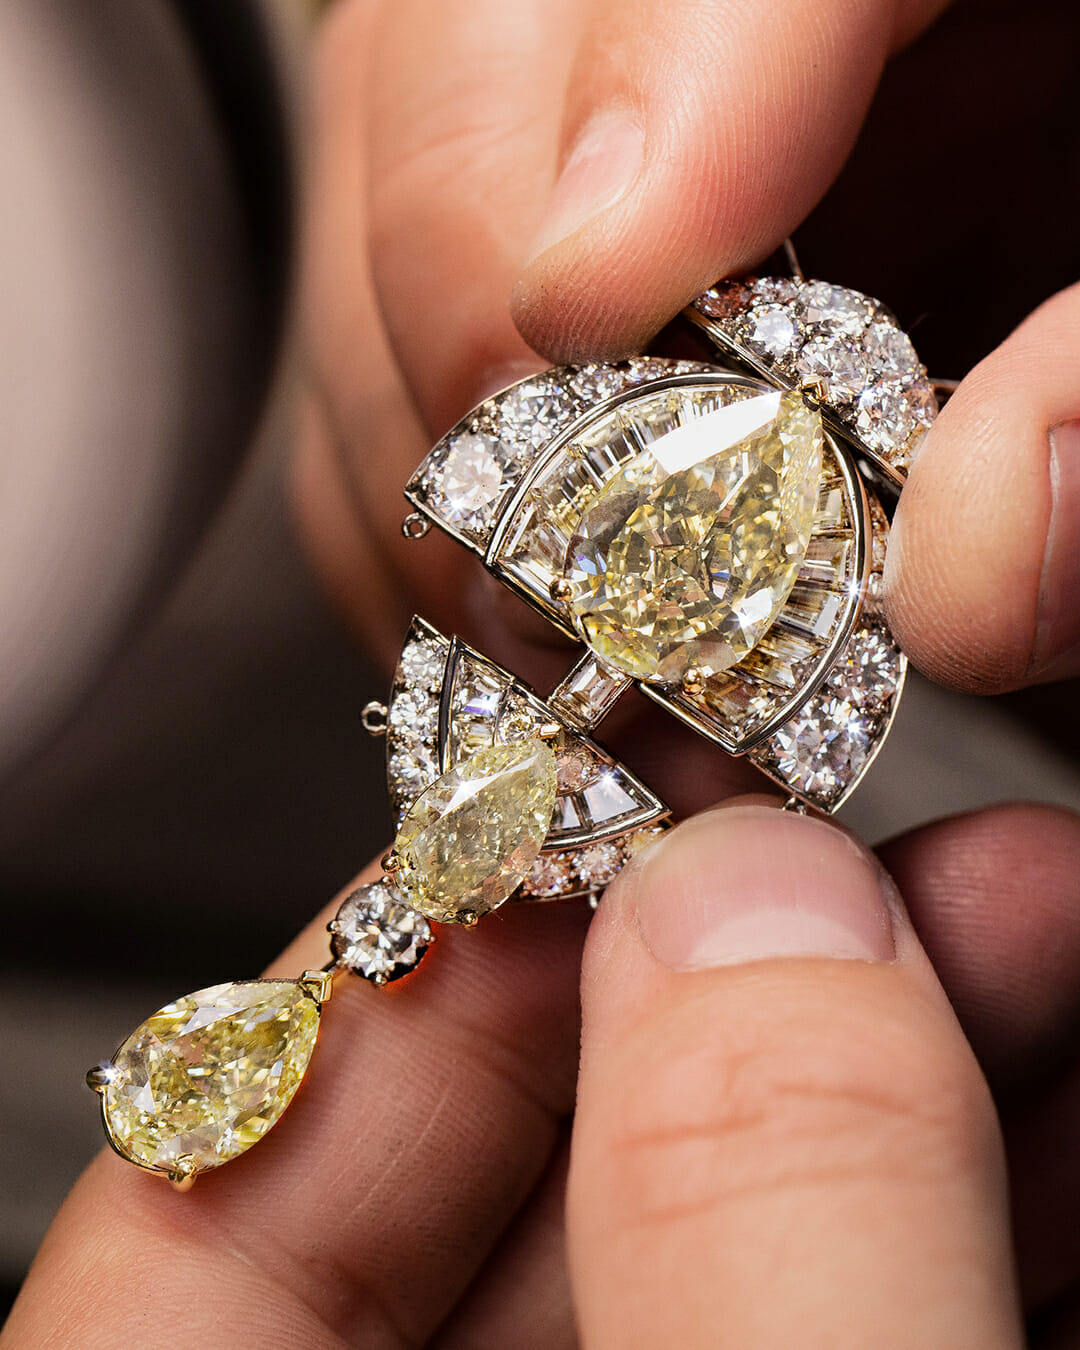 A Remarkable Art: The Making of Graff's New High Jewellery Collection -  Financial Times - Partner Content by Graff Diamonds